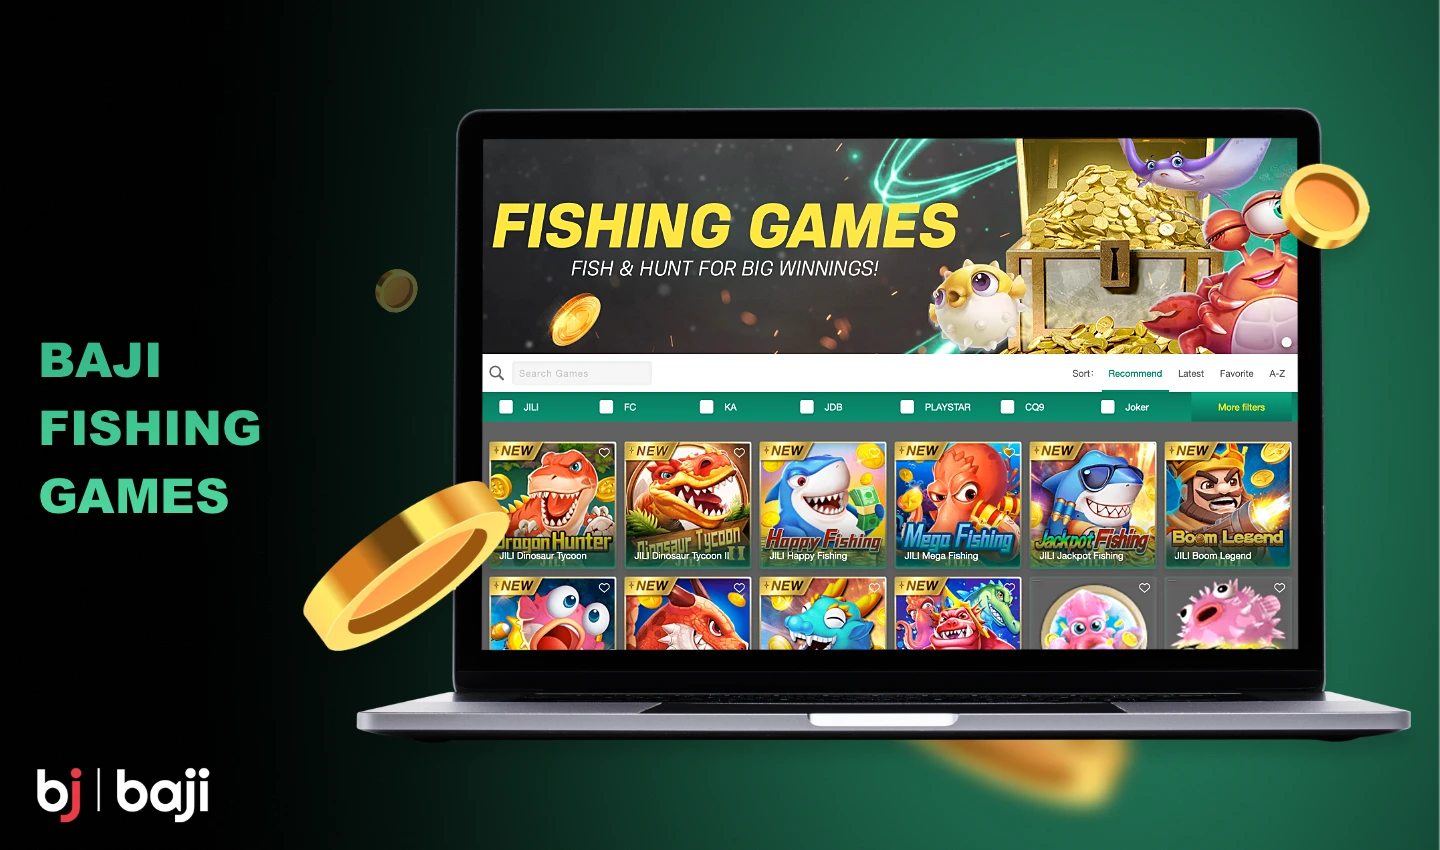 Fishing games are particularly popular among Baji Casino players